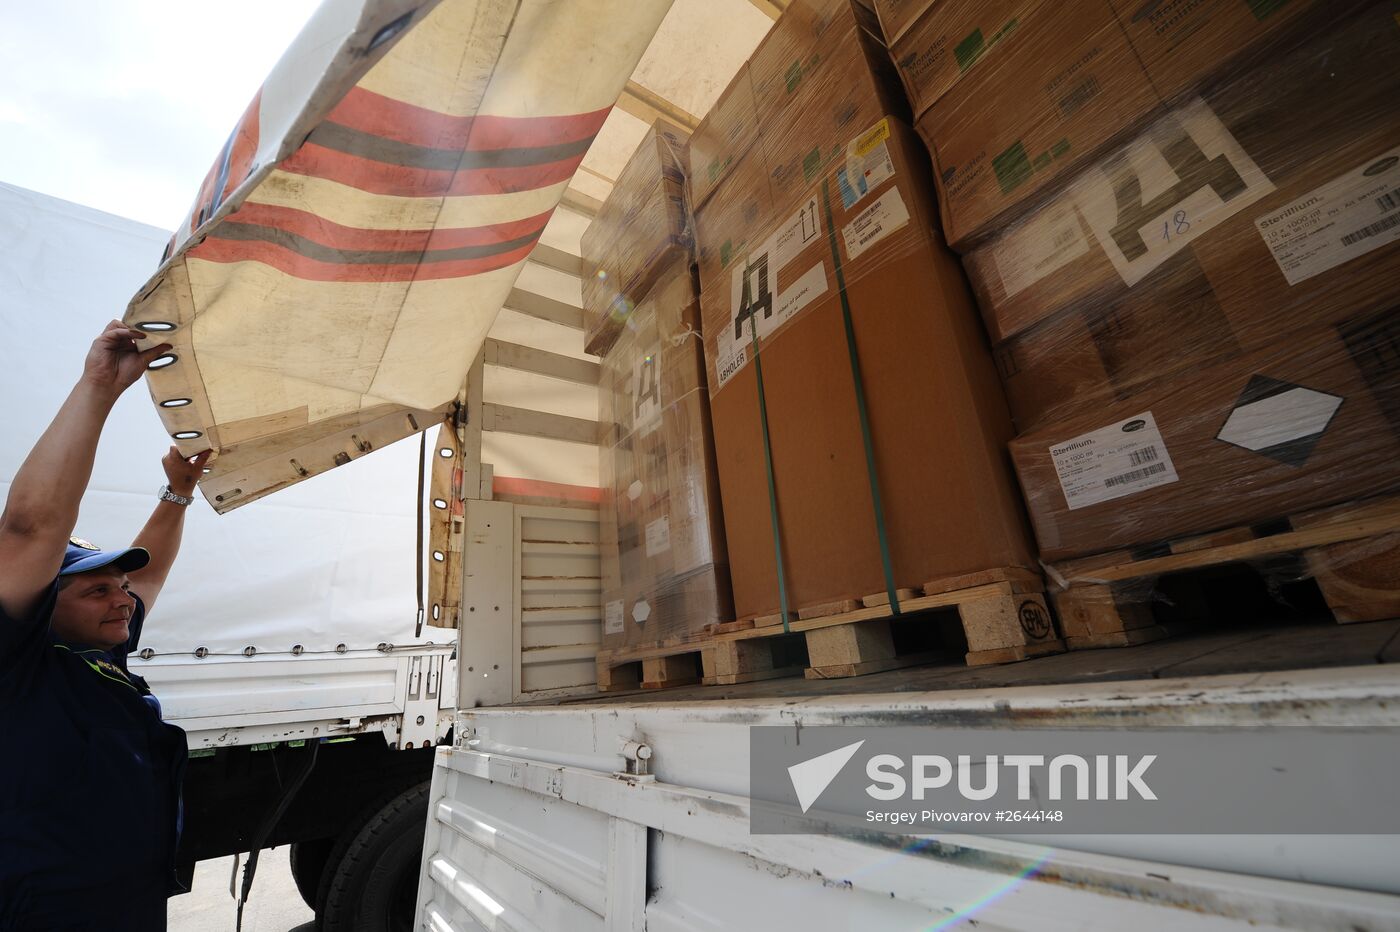 Next Emergencies Ministry's humanitarian aid convoy for Donbass